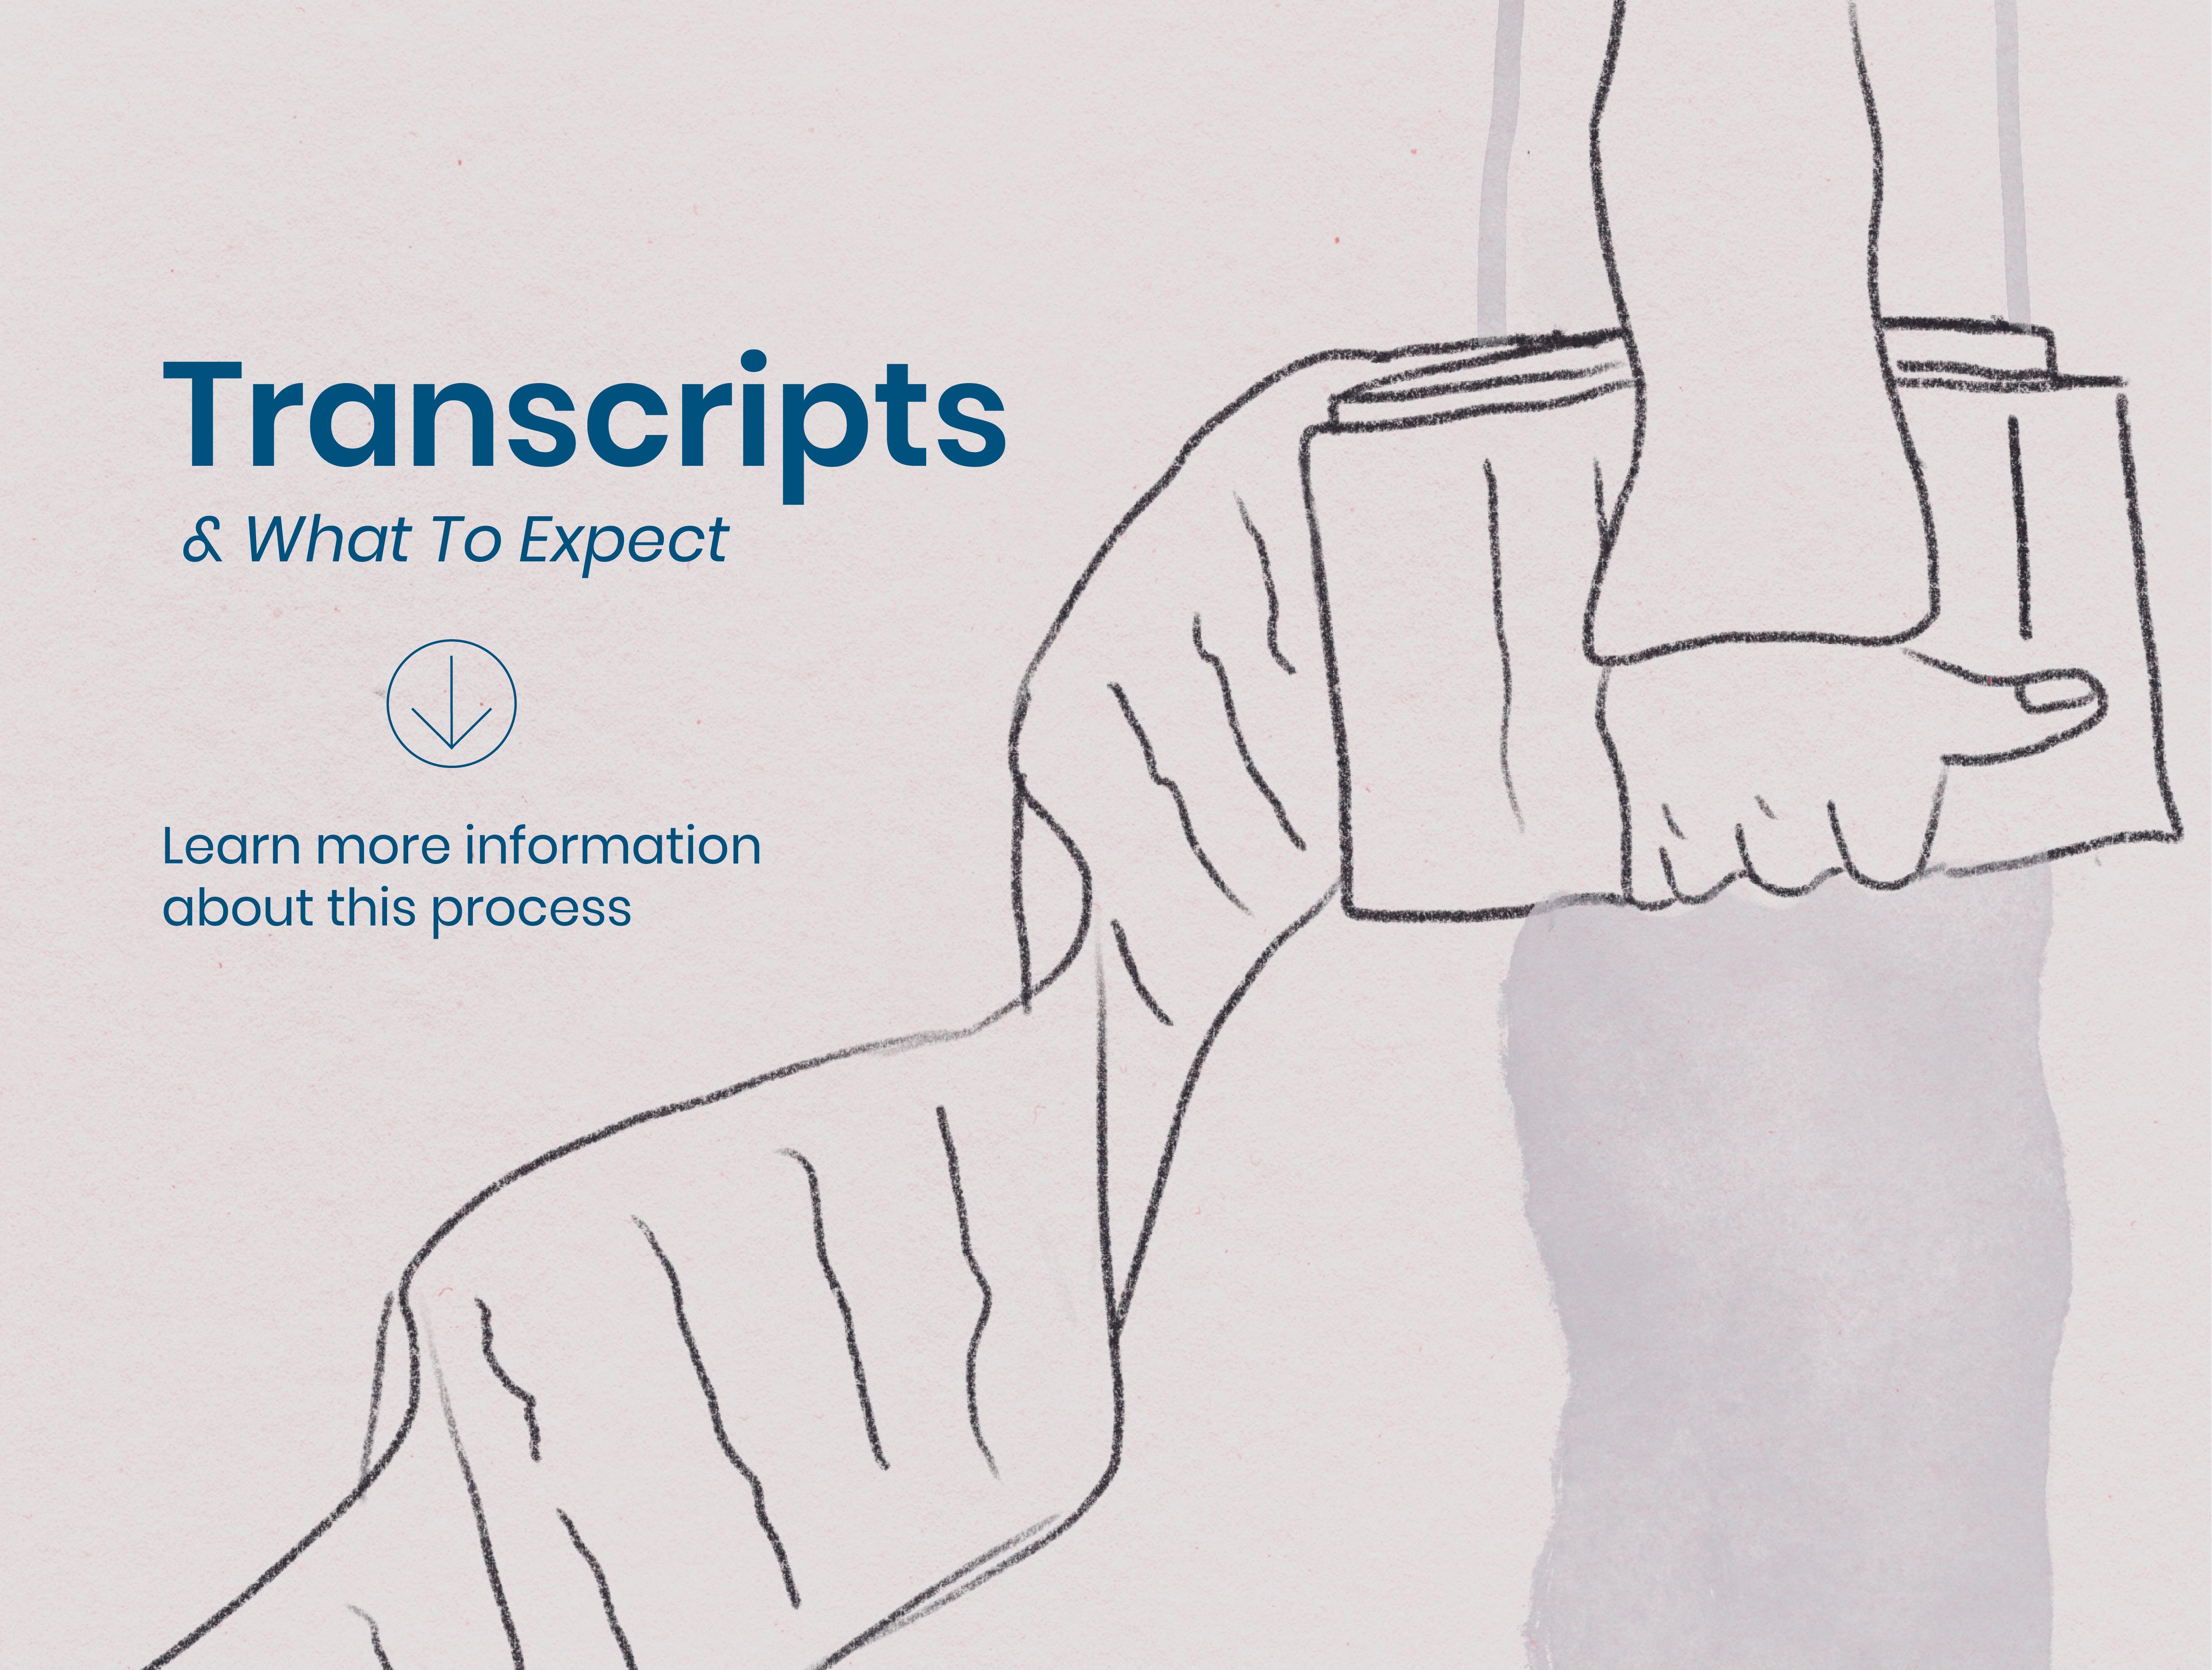 Transcripts and what to expect